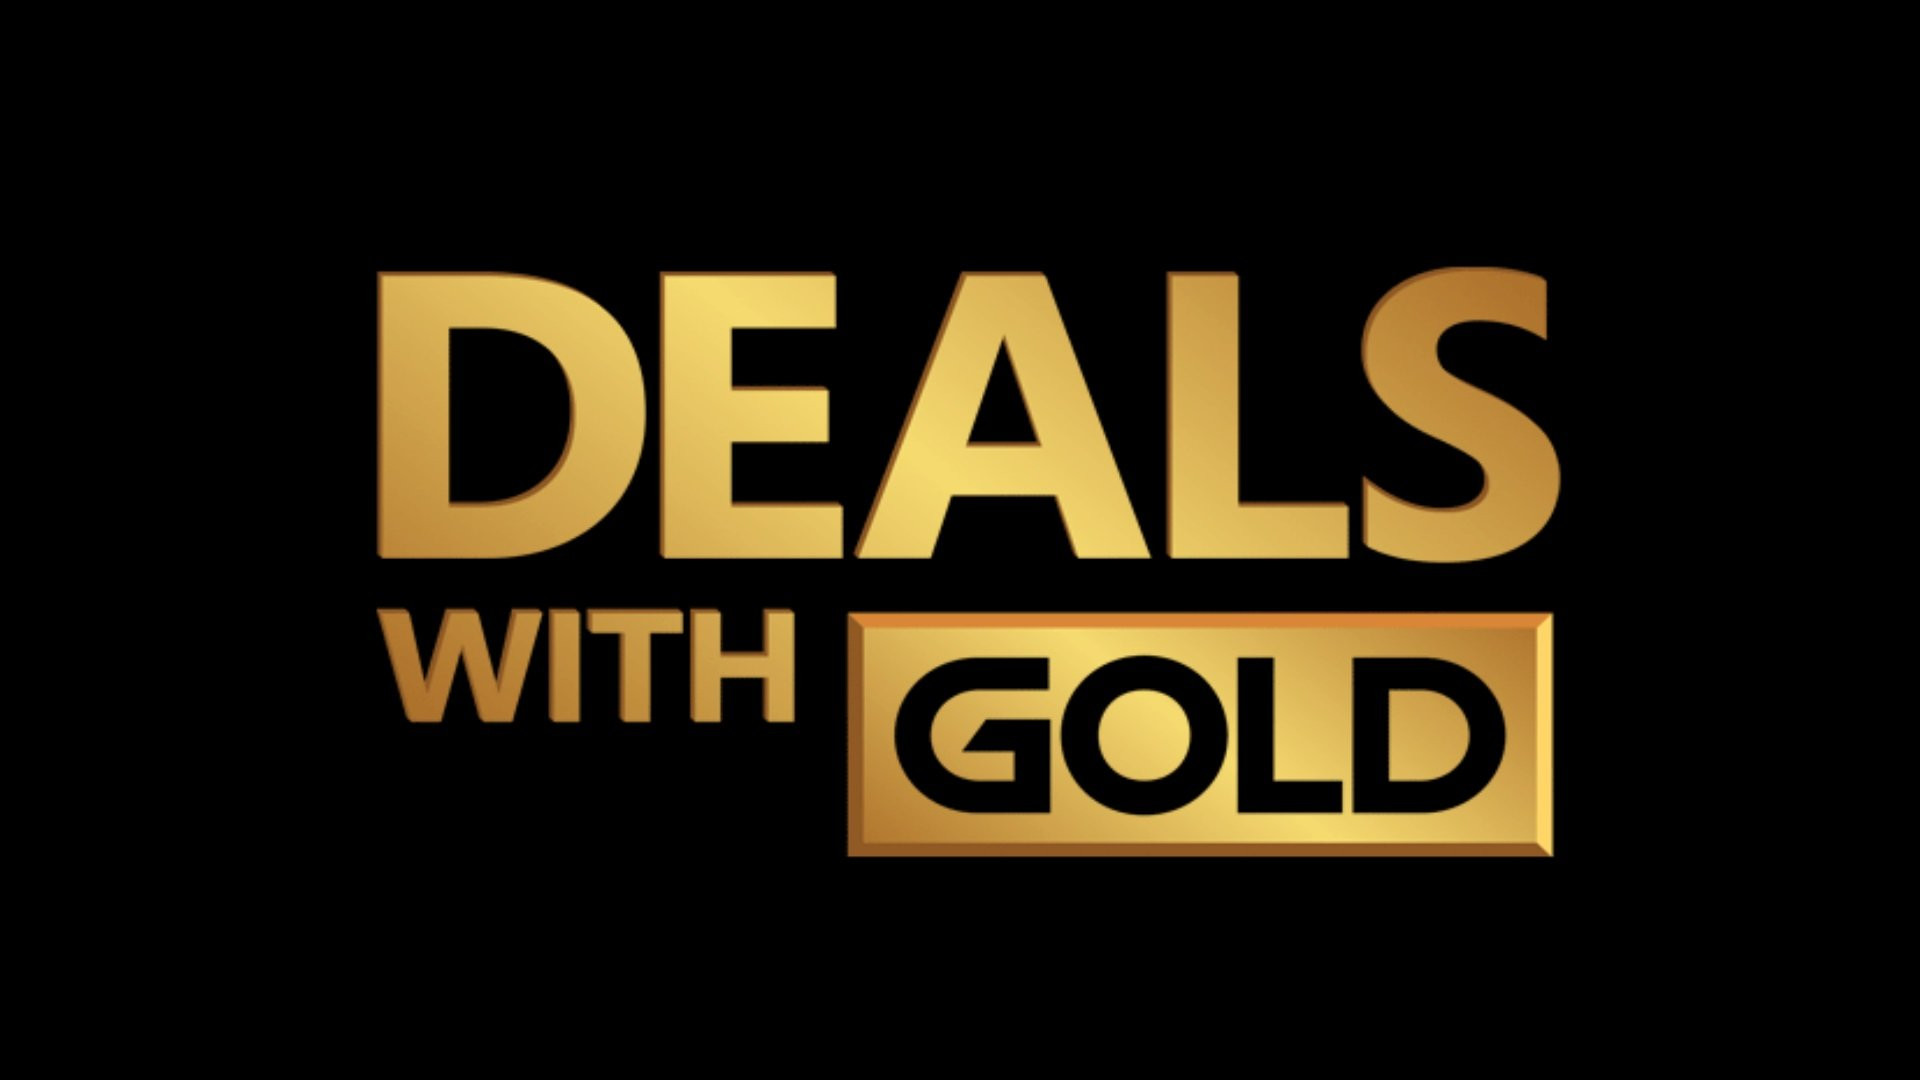 Deals with Gold semaine 46